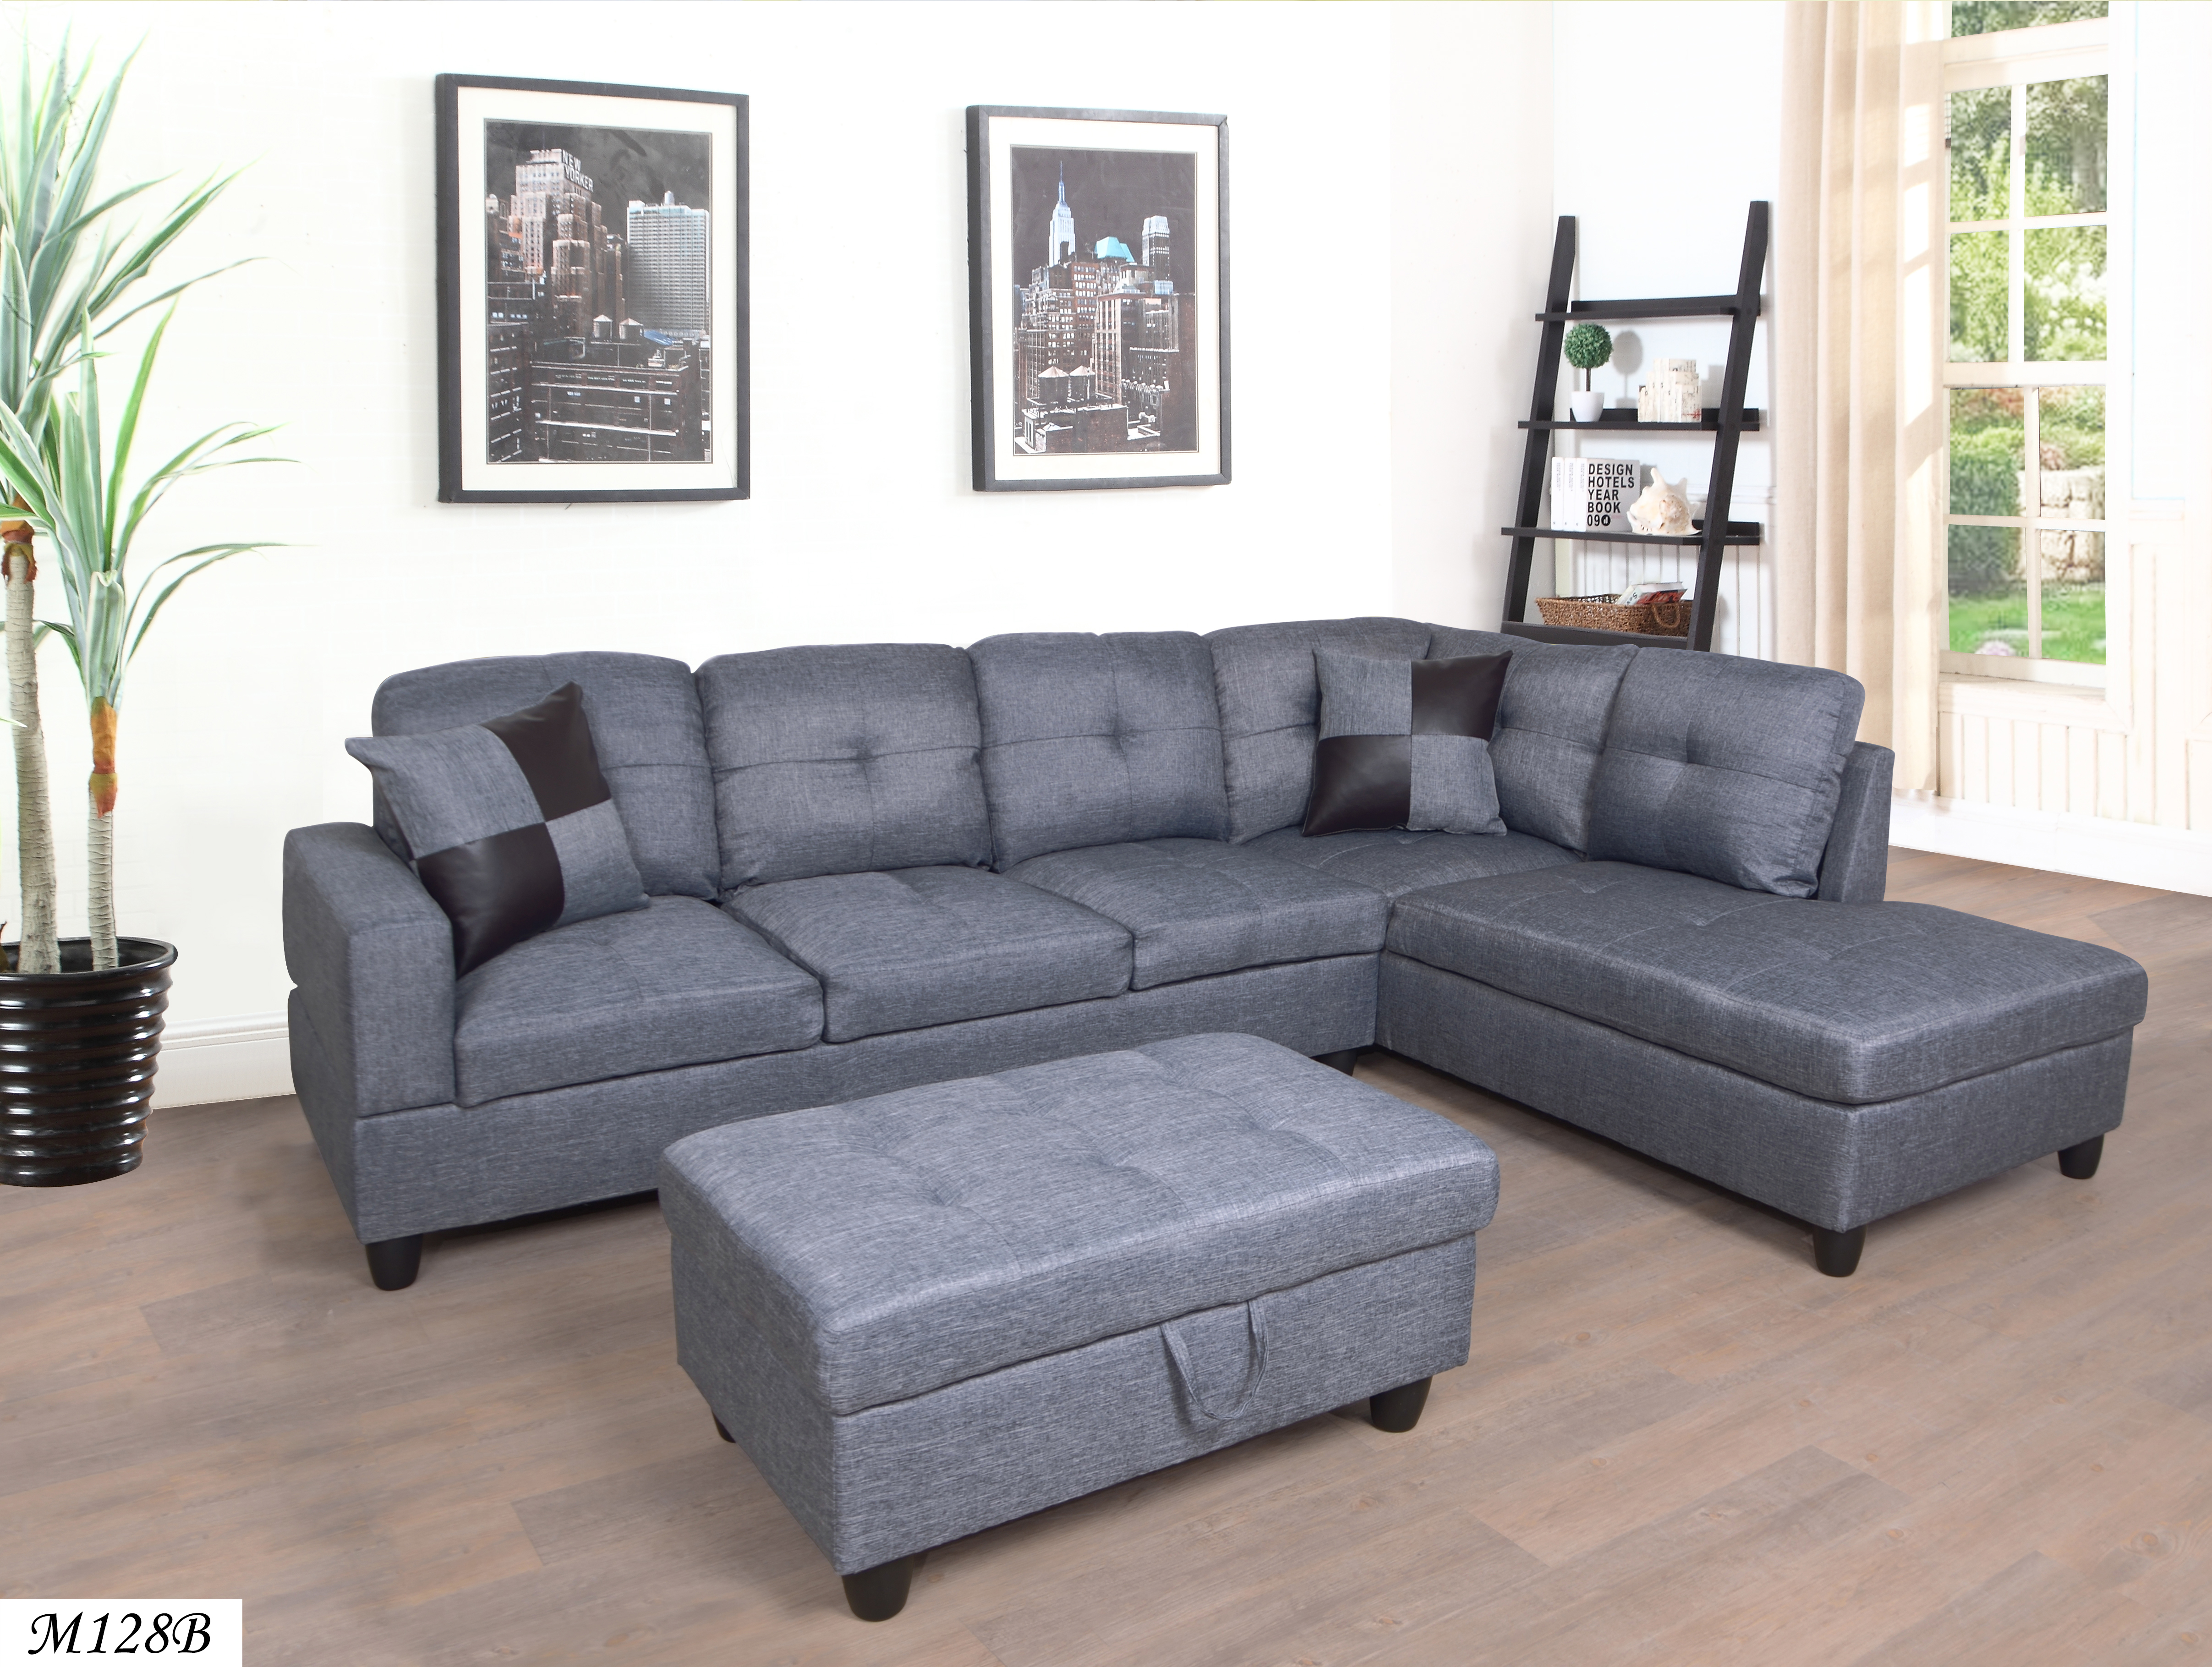 3 PC Sectional Sofa Set, (Gray) Linen Right -Facing Chaise with Free Storage Ottoman-CASAINC